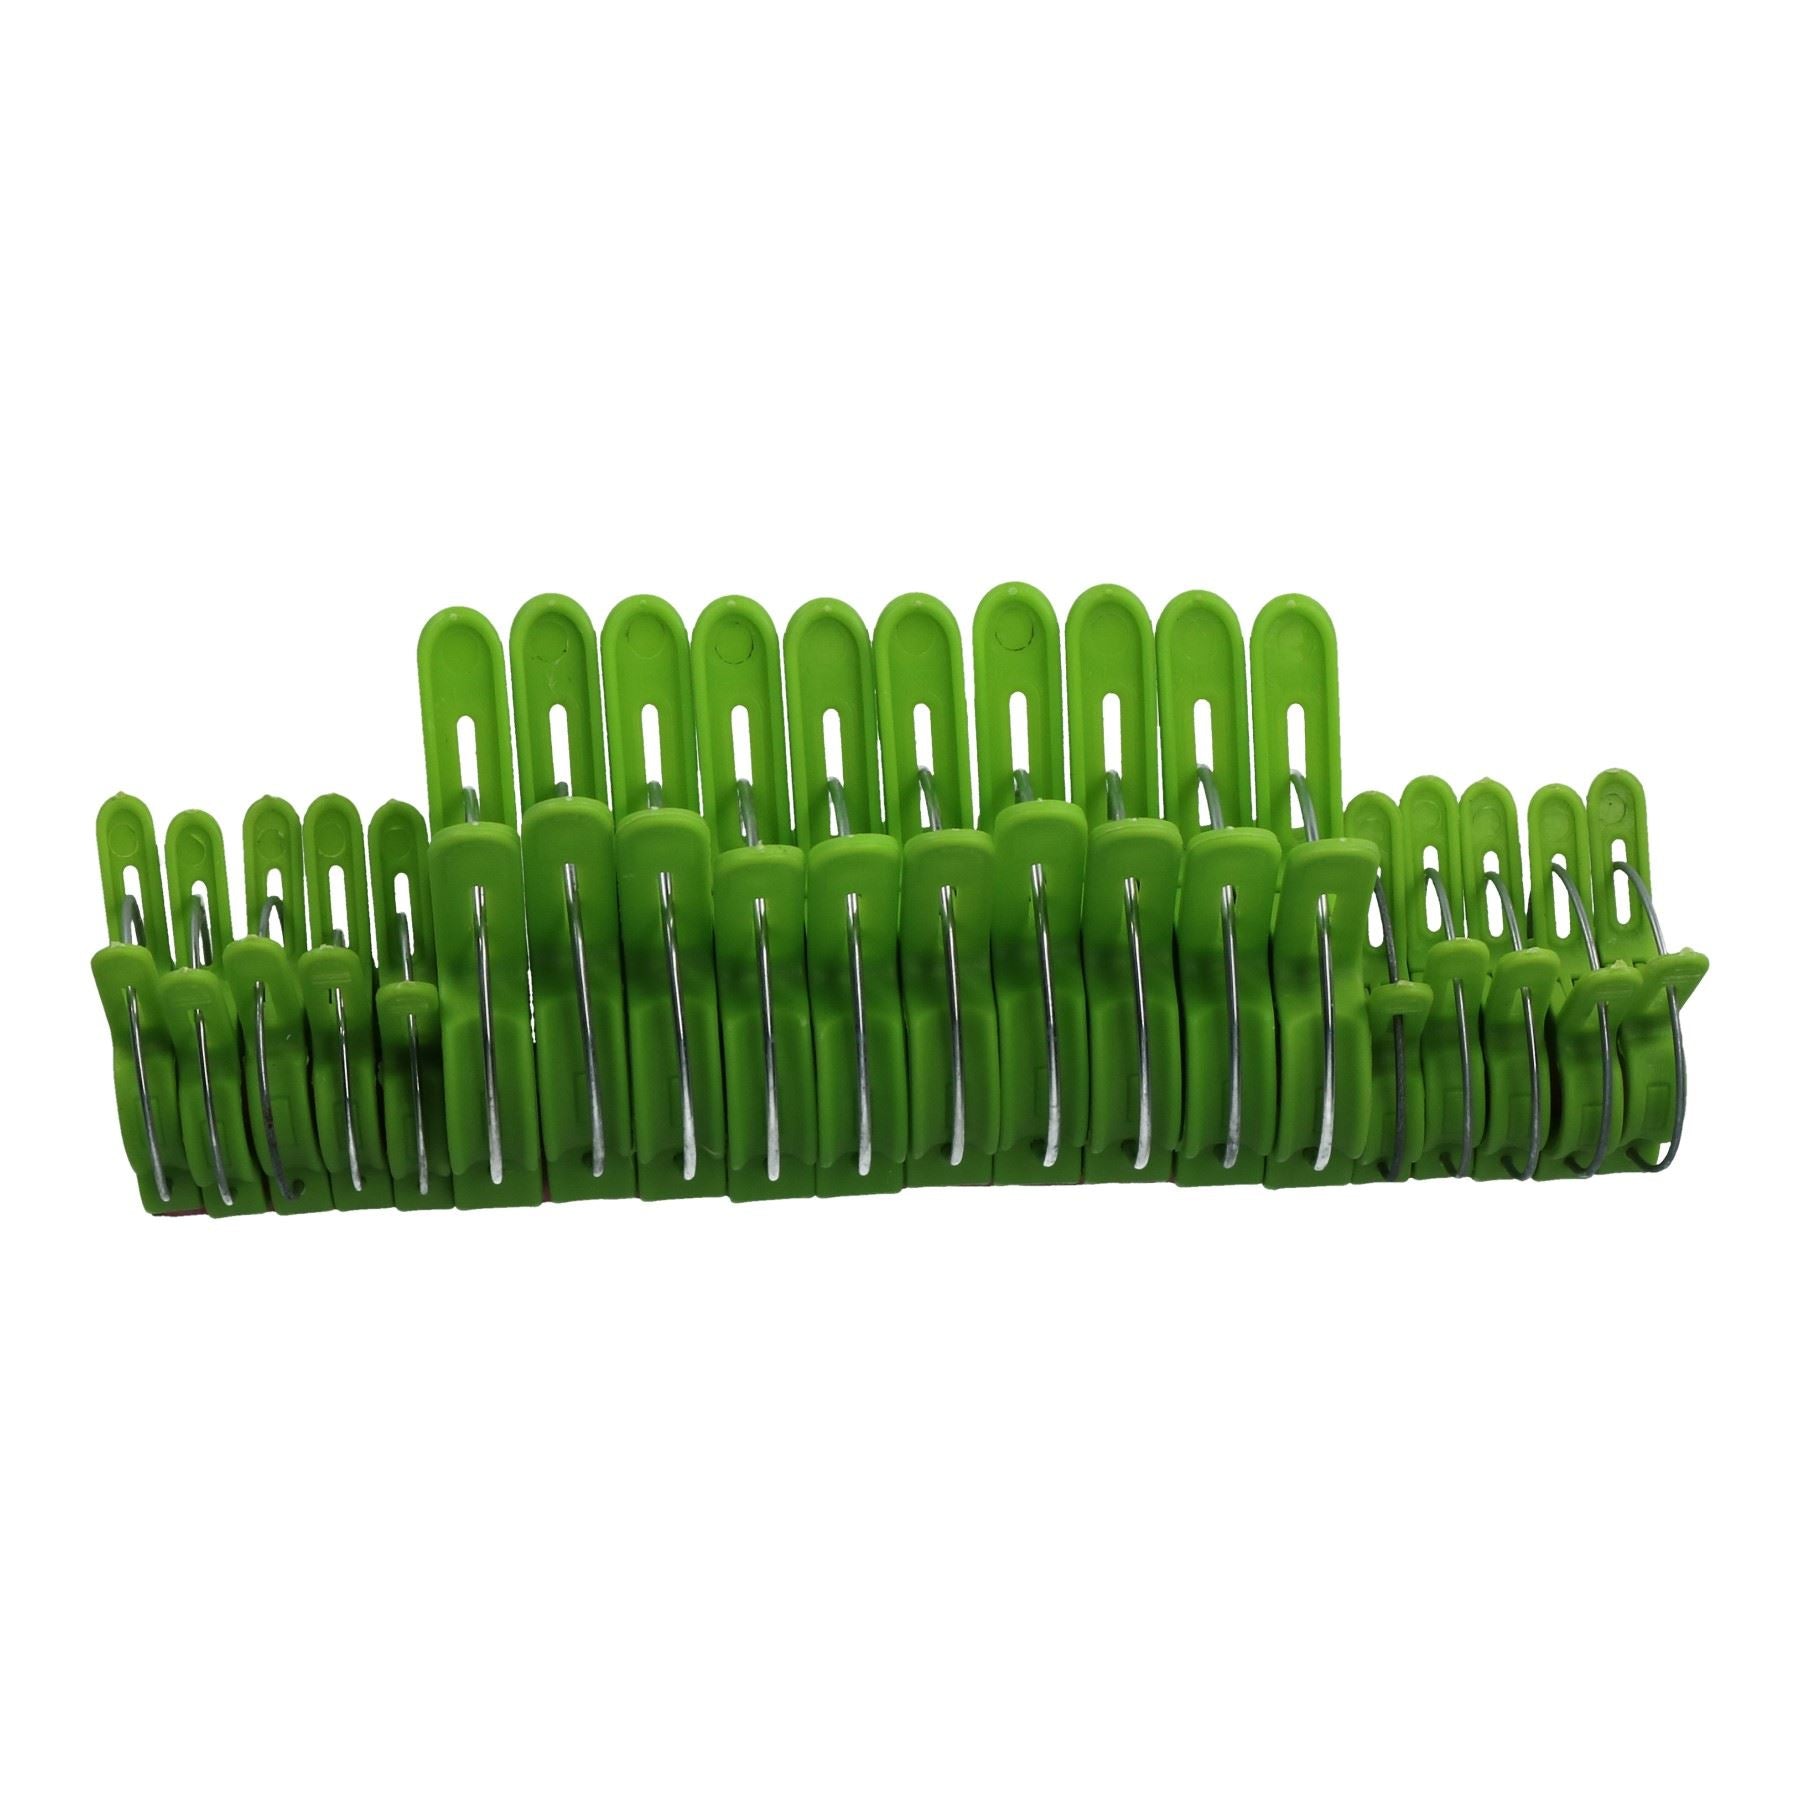 20pc Assorted Plant Clips Flower Plastic Sprung Clip Ties Holder 30mm & 45mm